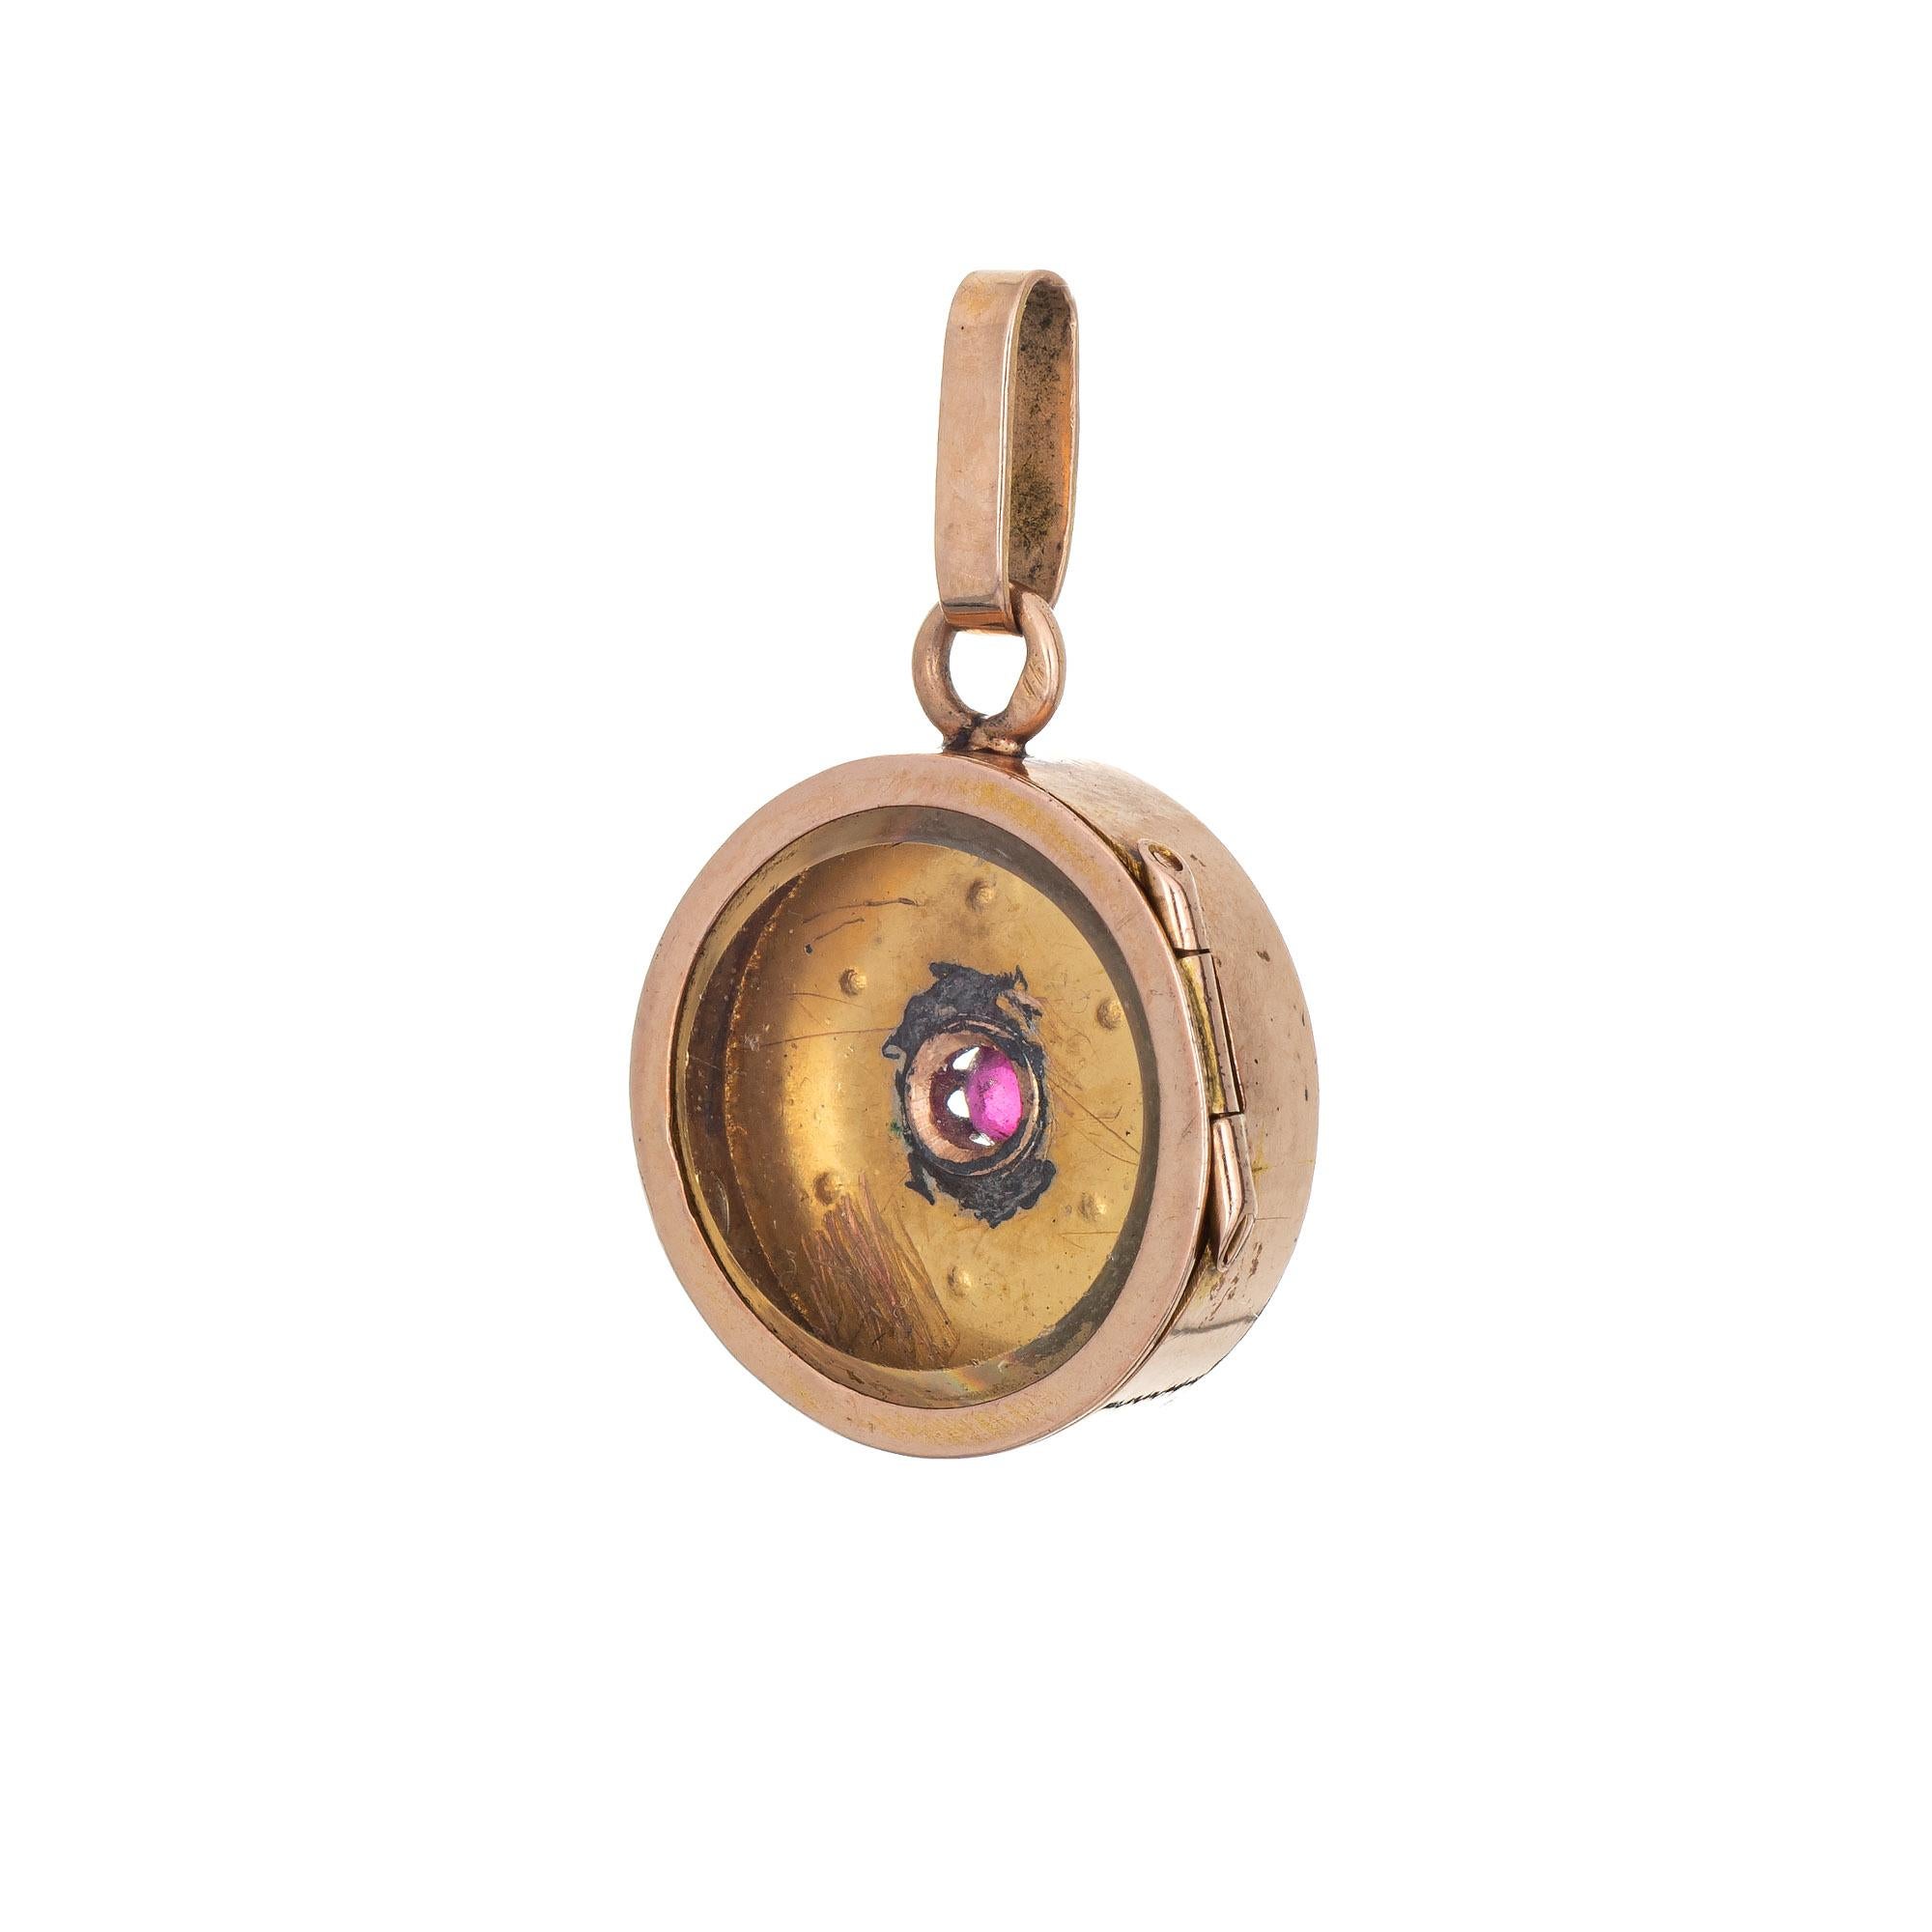 Finely detailed Victorian pendant or charm (circa 1880s to 1900s), crafted in 14 karat rose gold. 

Six seed pearls measure 1mm each, with an estimated 0.10 carat ruby set to the center.
The small pendant features a pearl and ruby set star to the